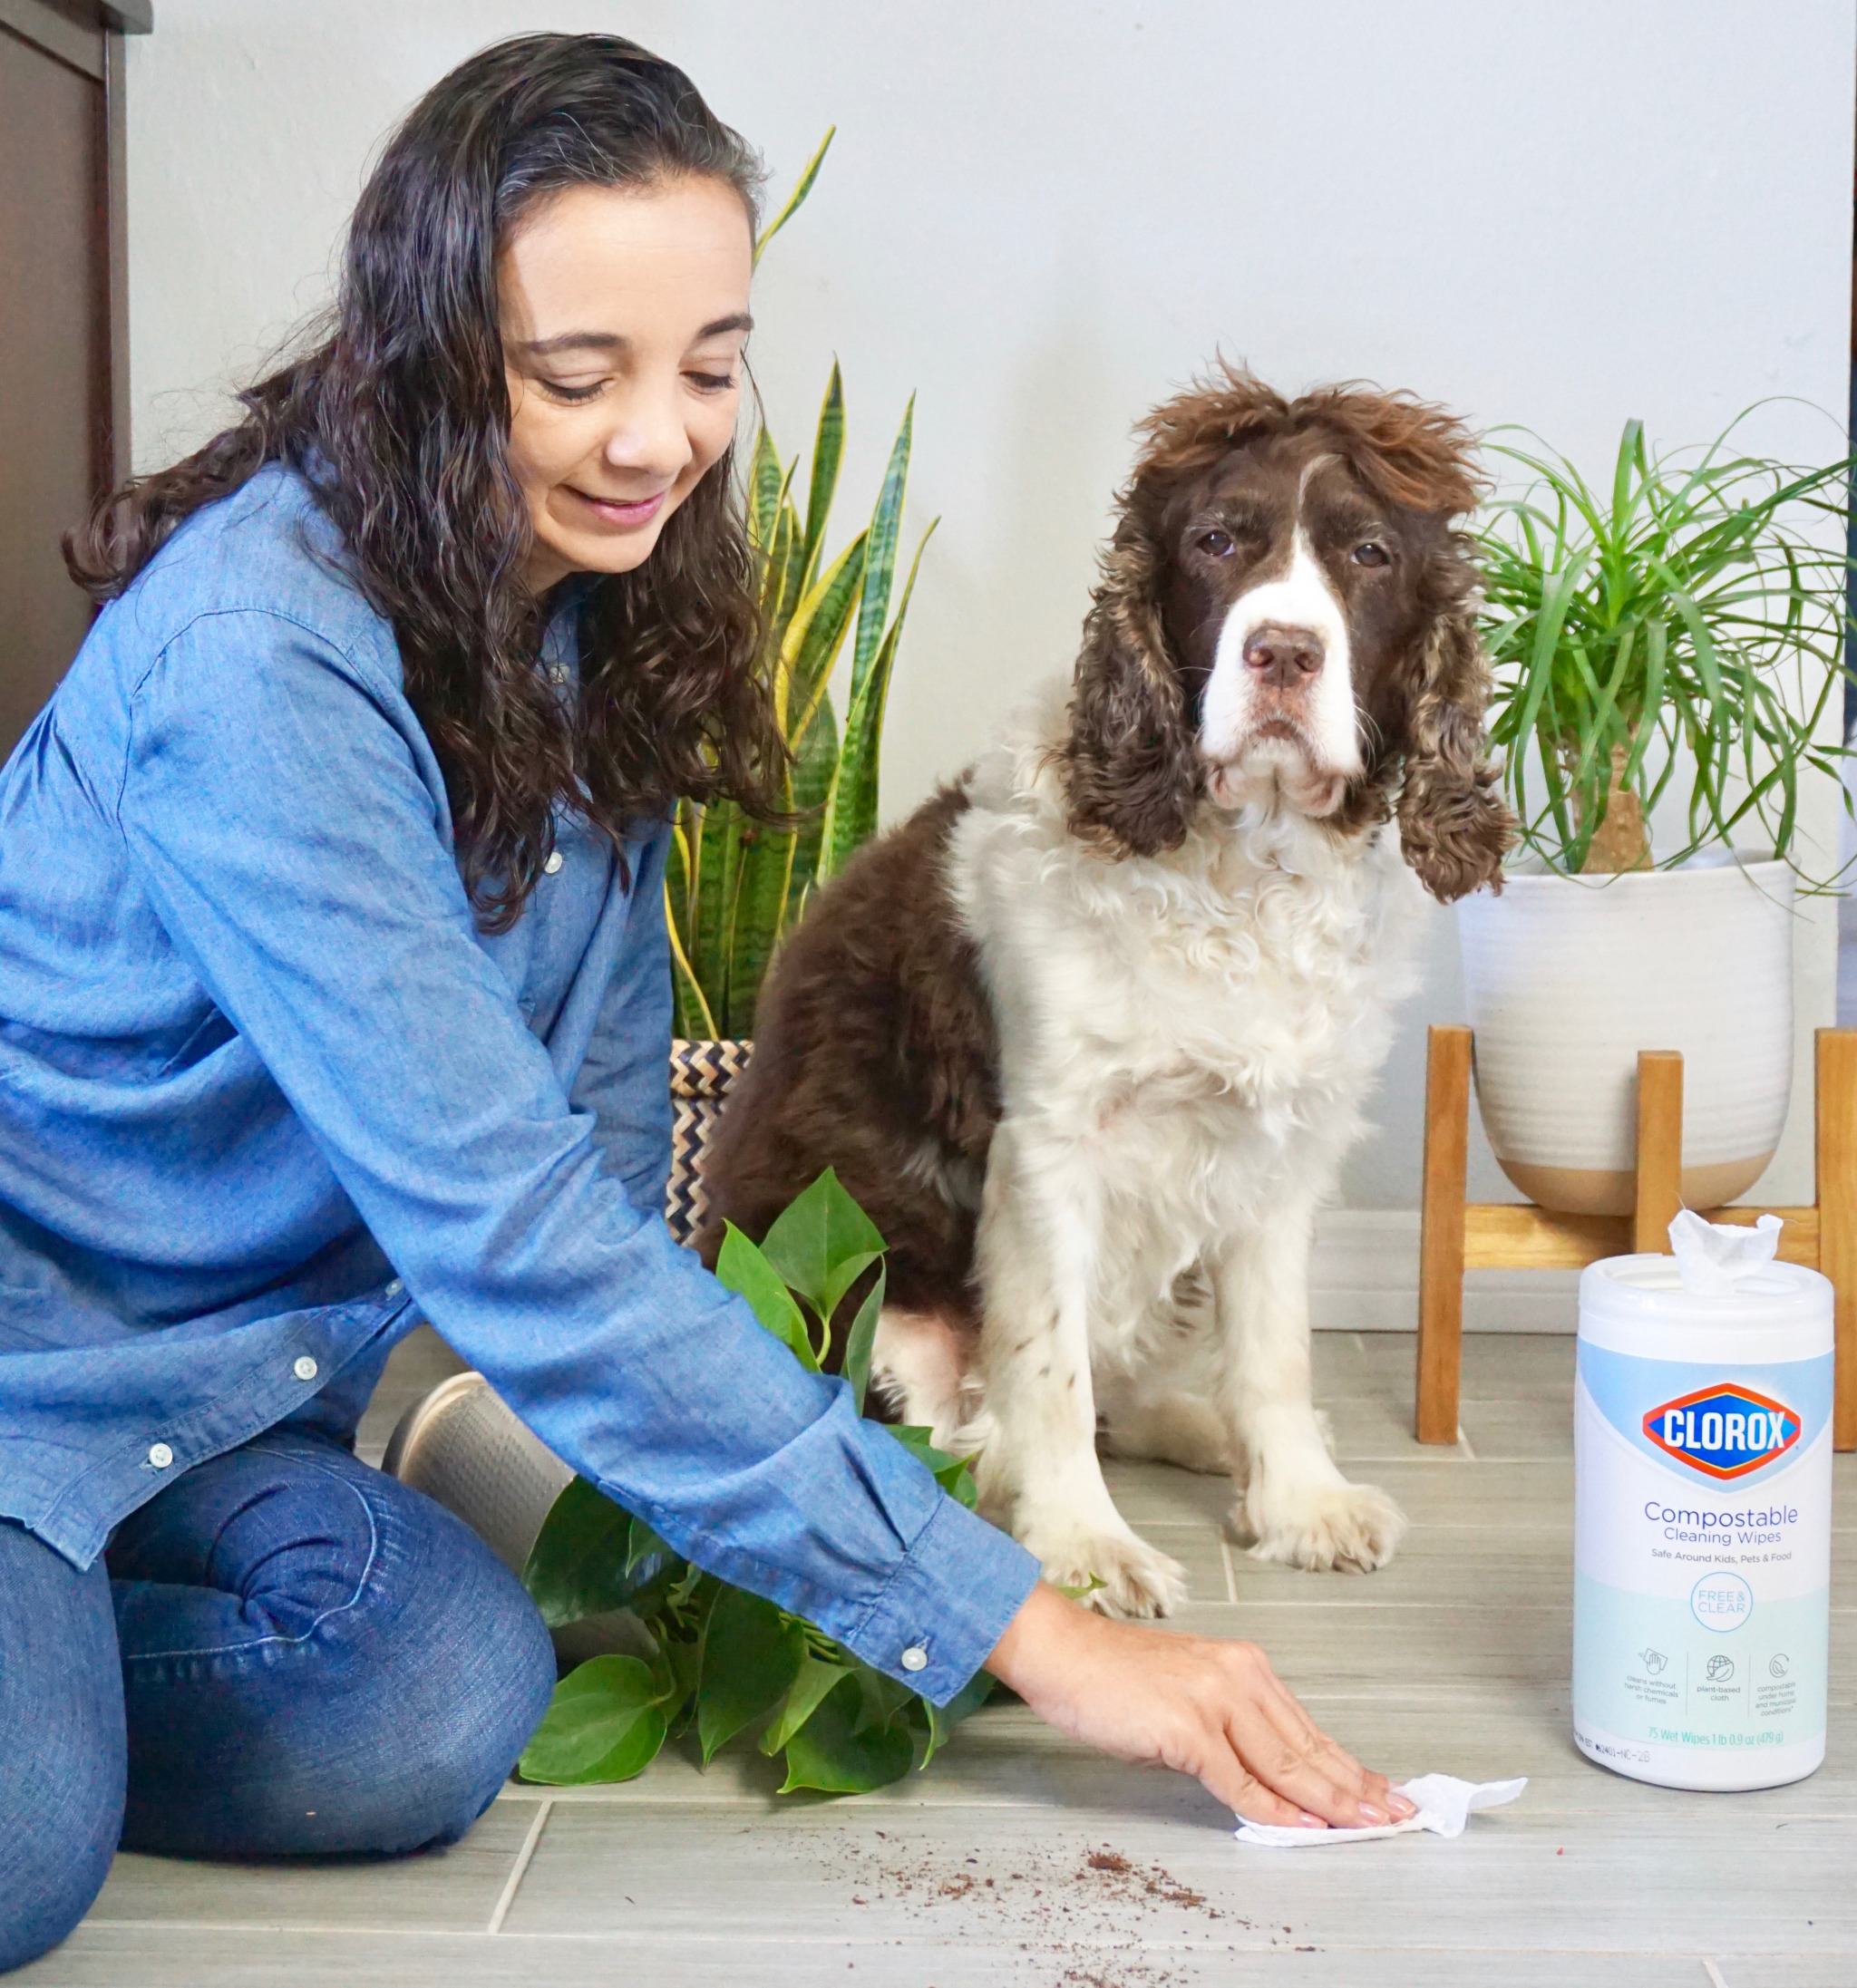 pet friendly cleaning products